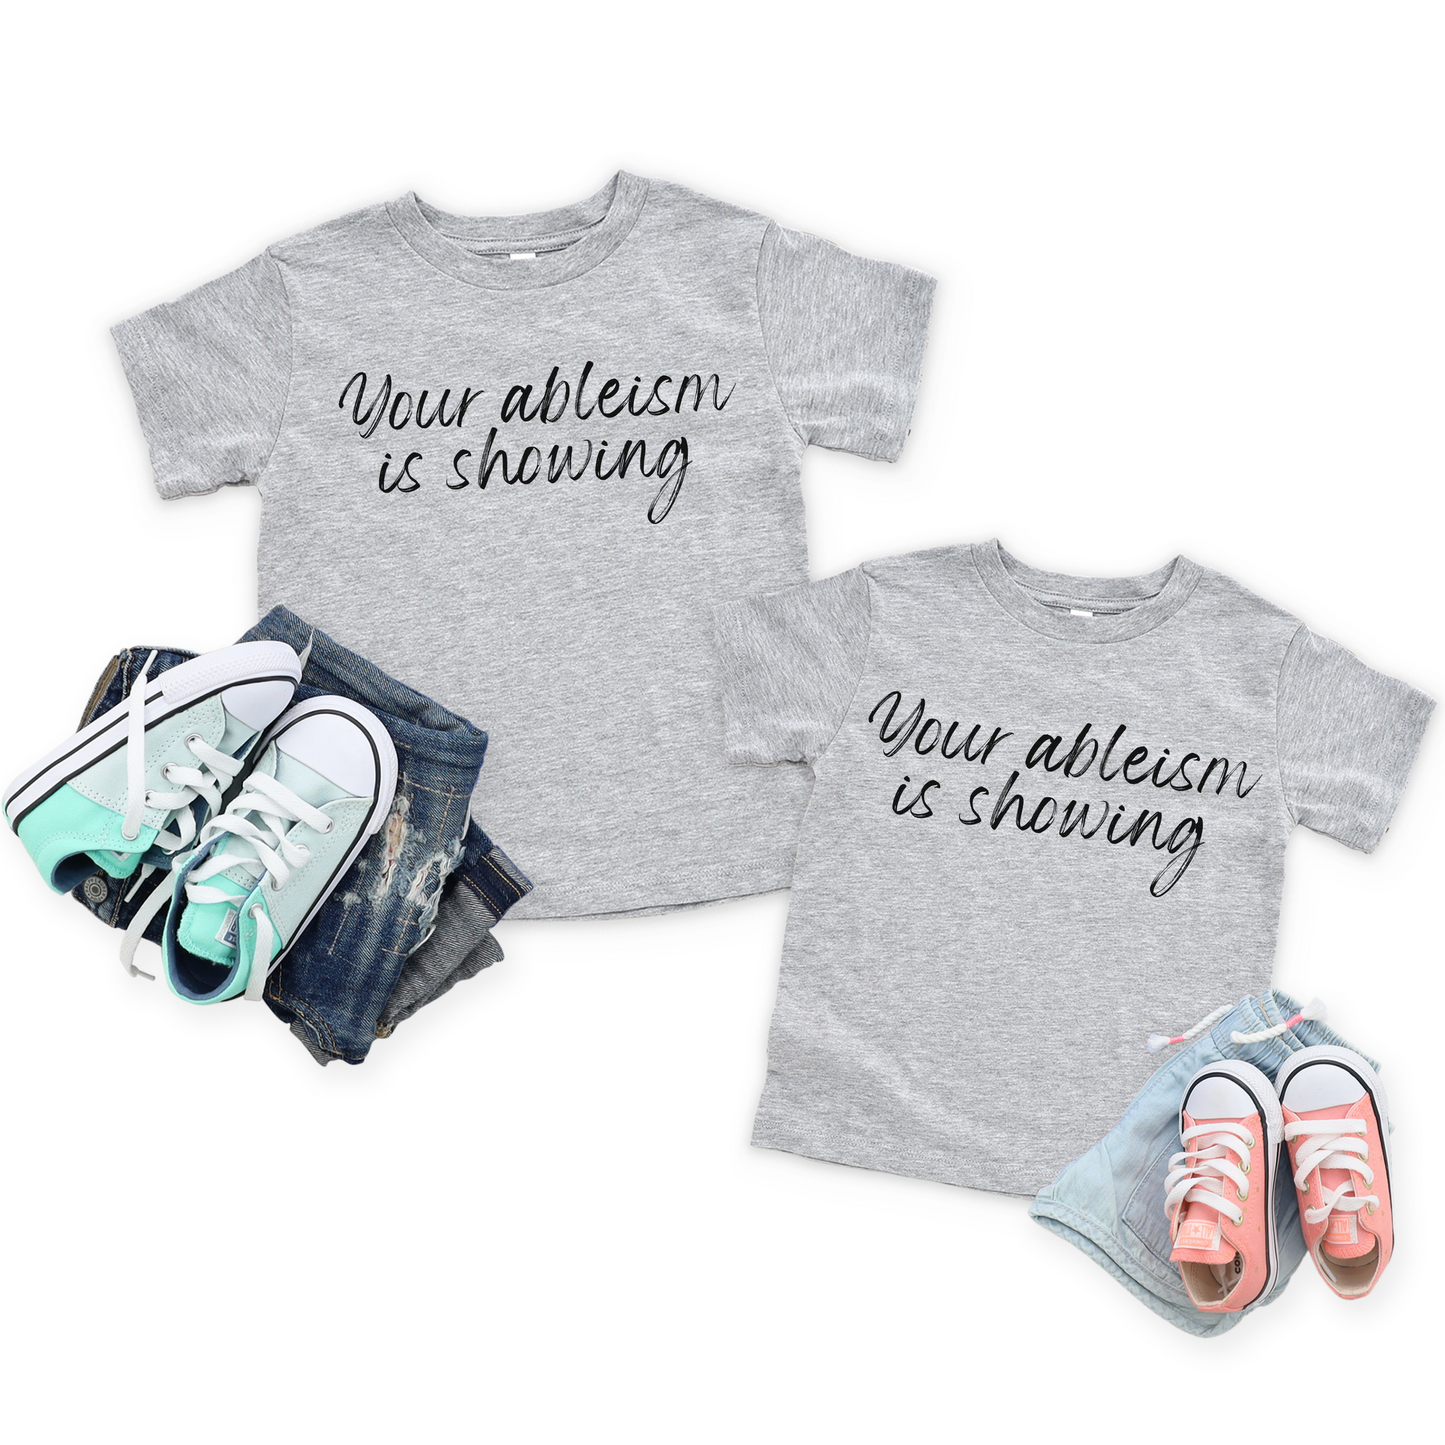 Youth Your Ableism is Showing Script Tee